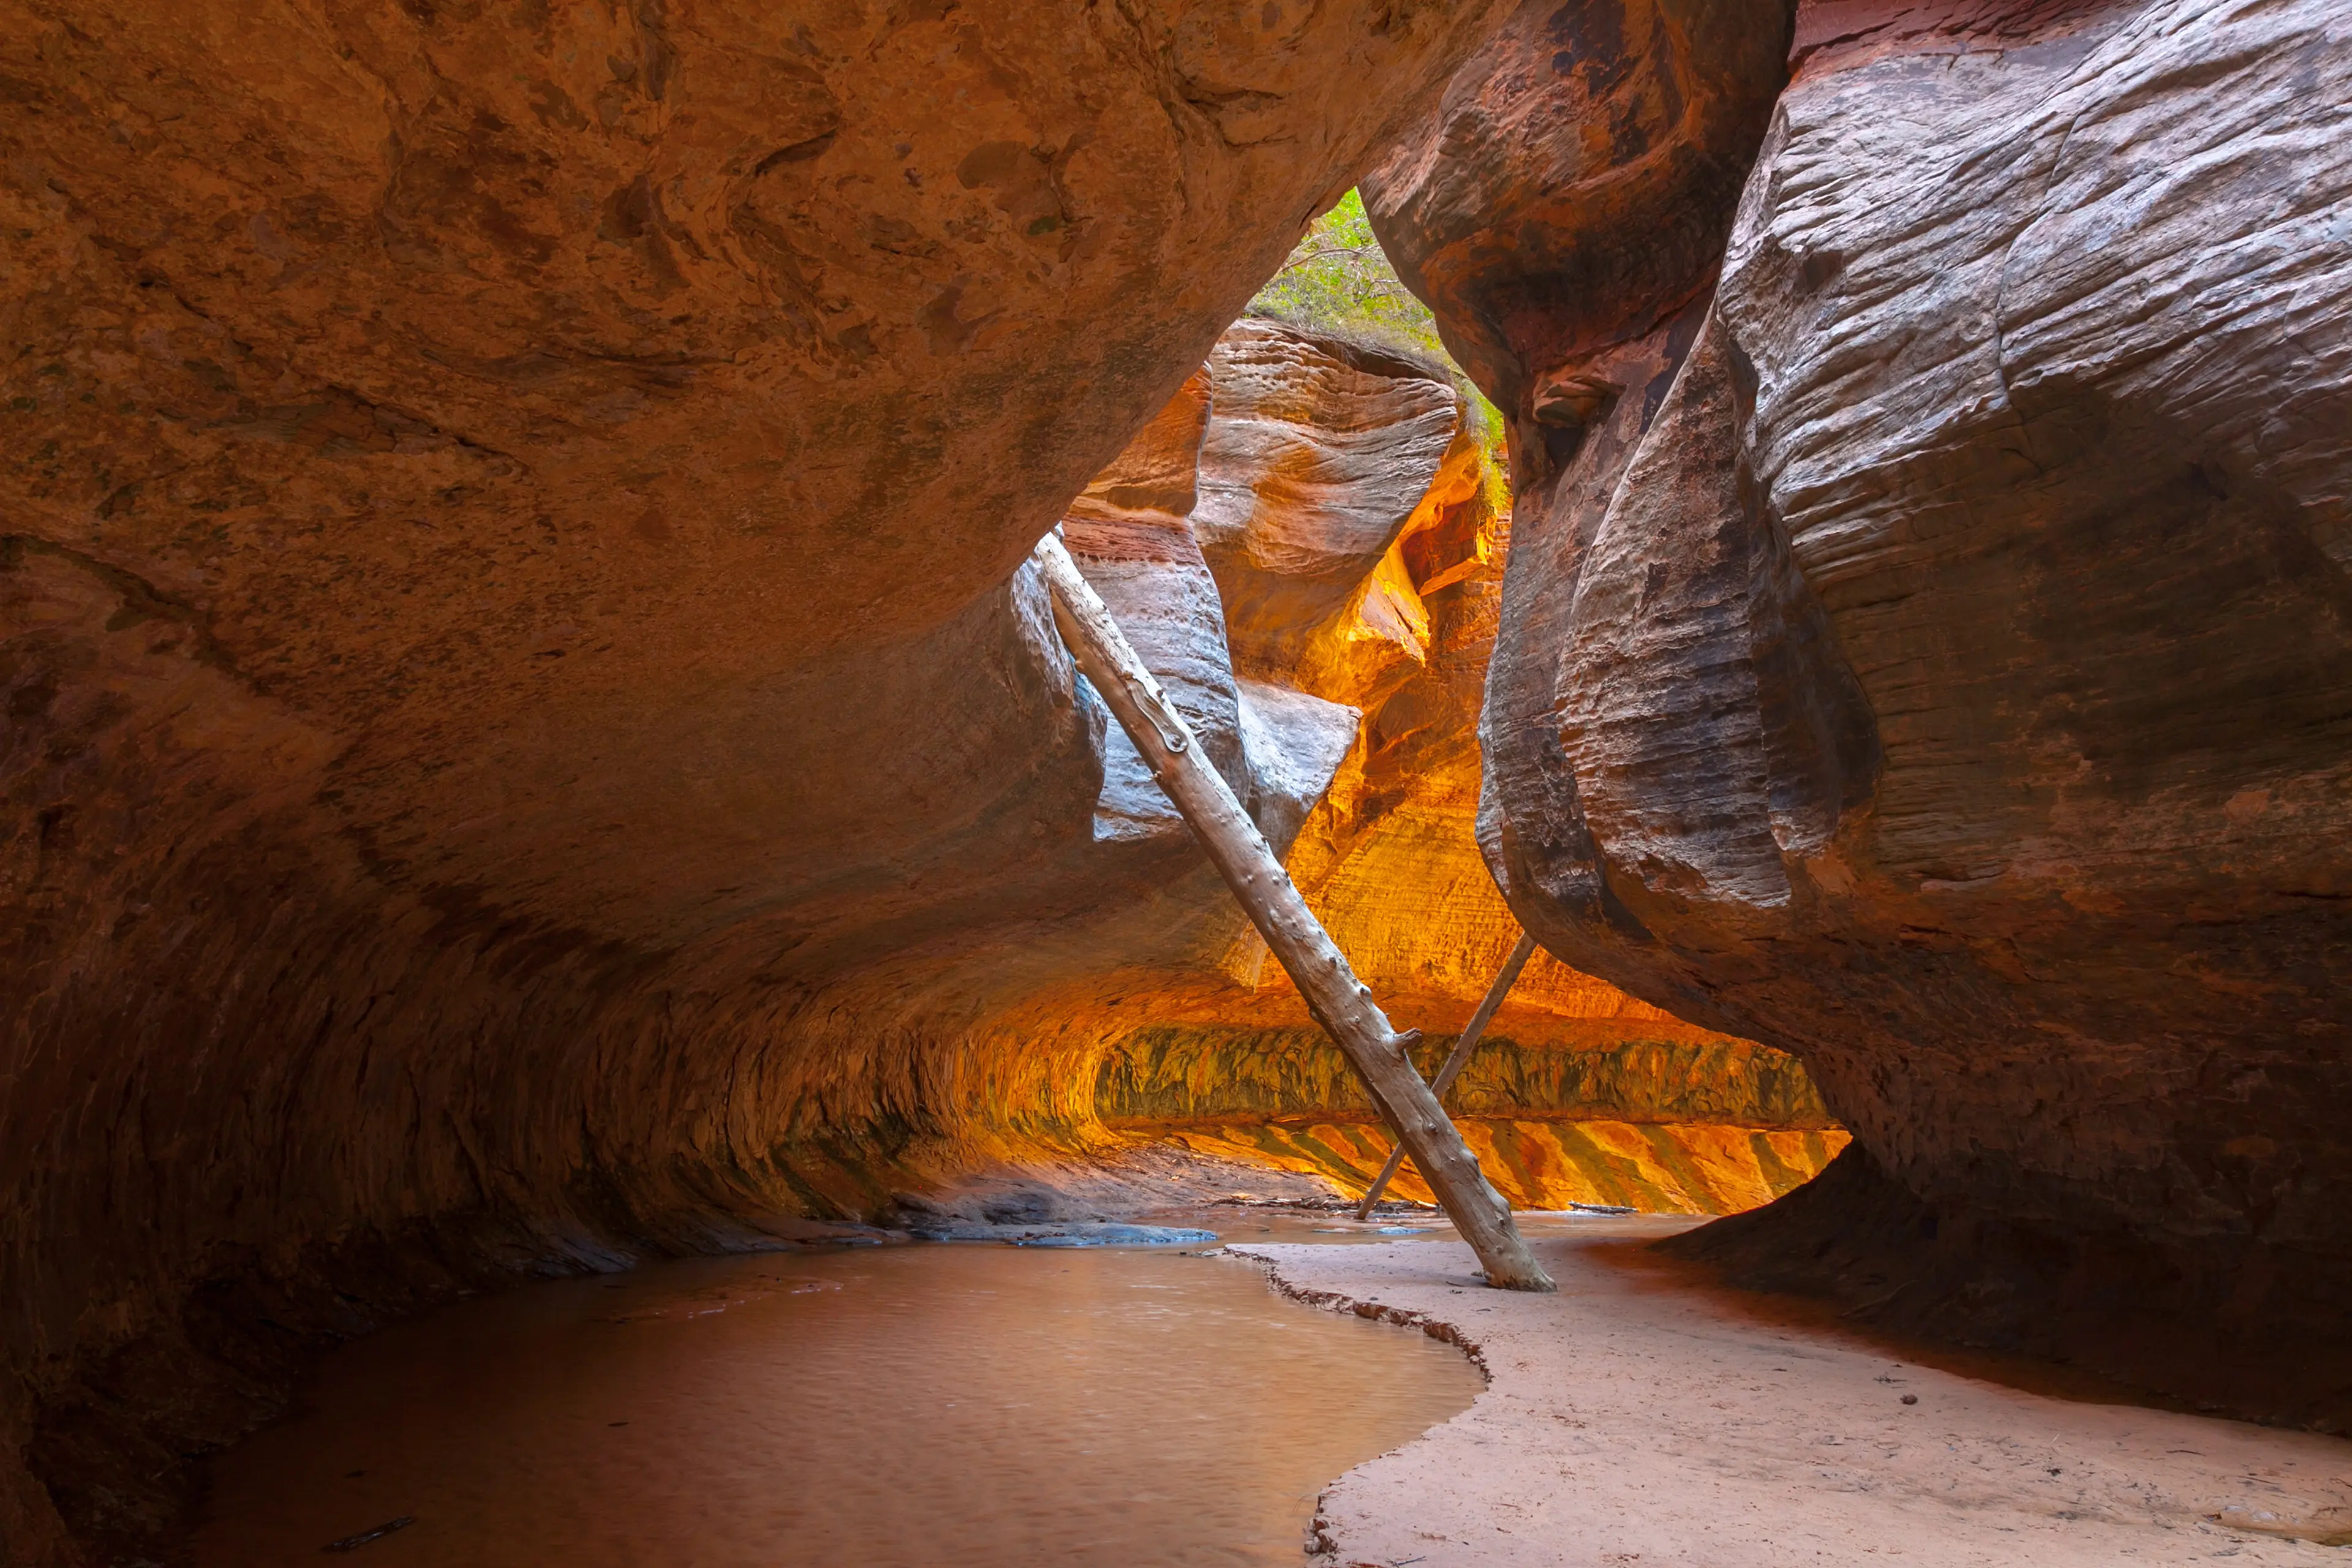 2-Day Exploration Adventure in Zion National Park, Utah